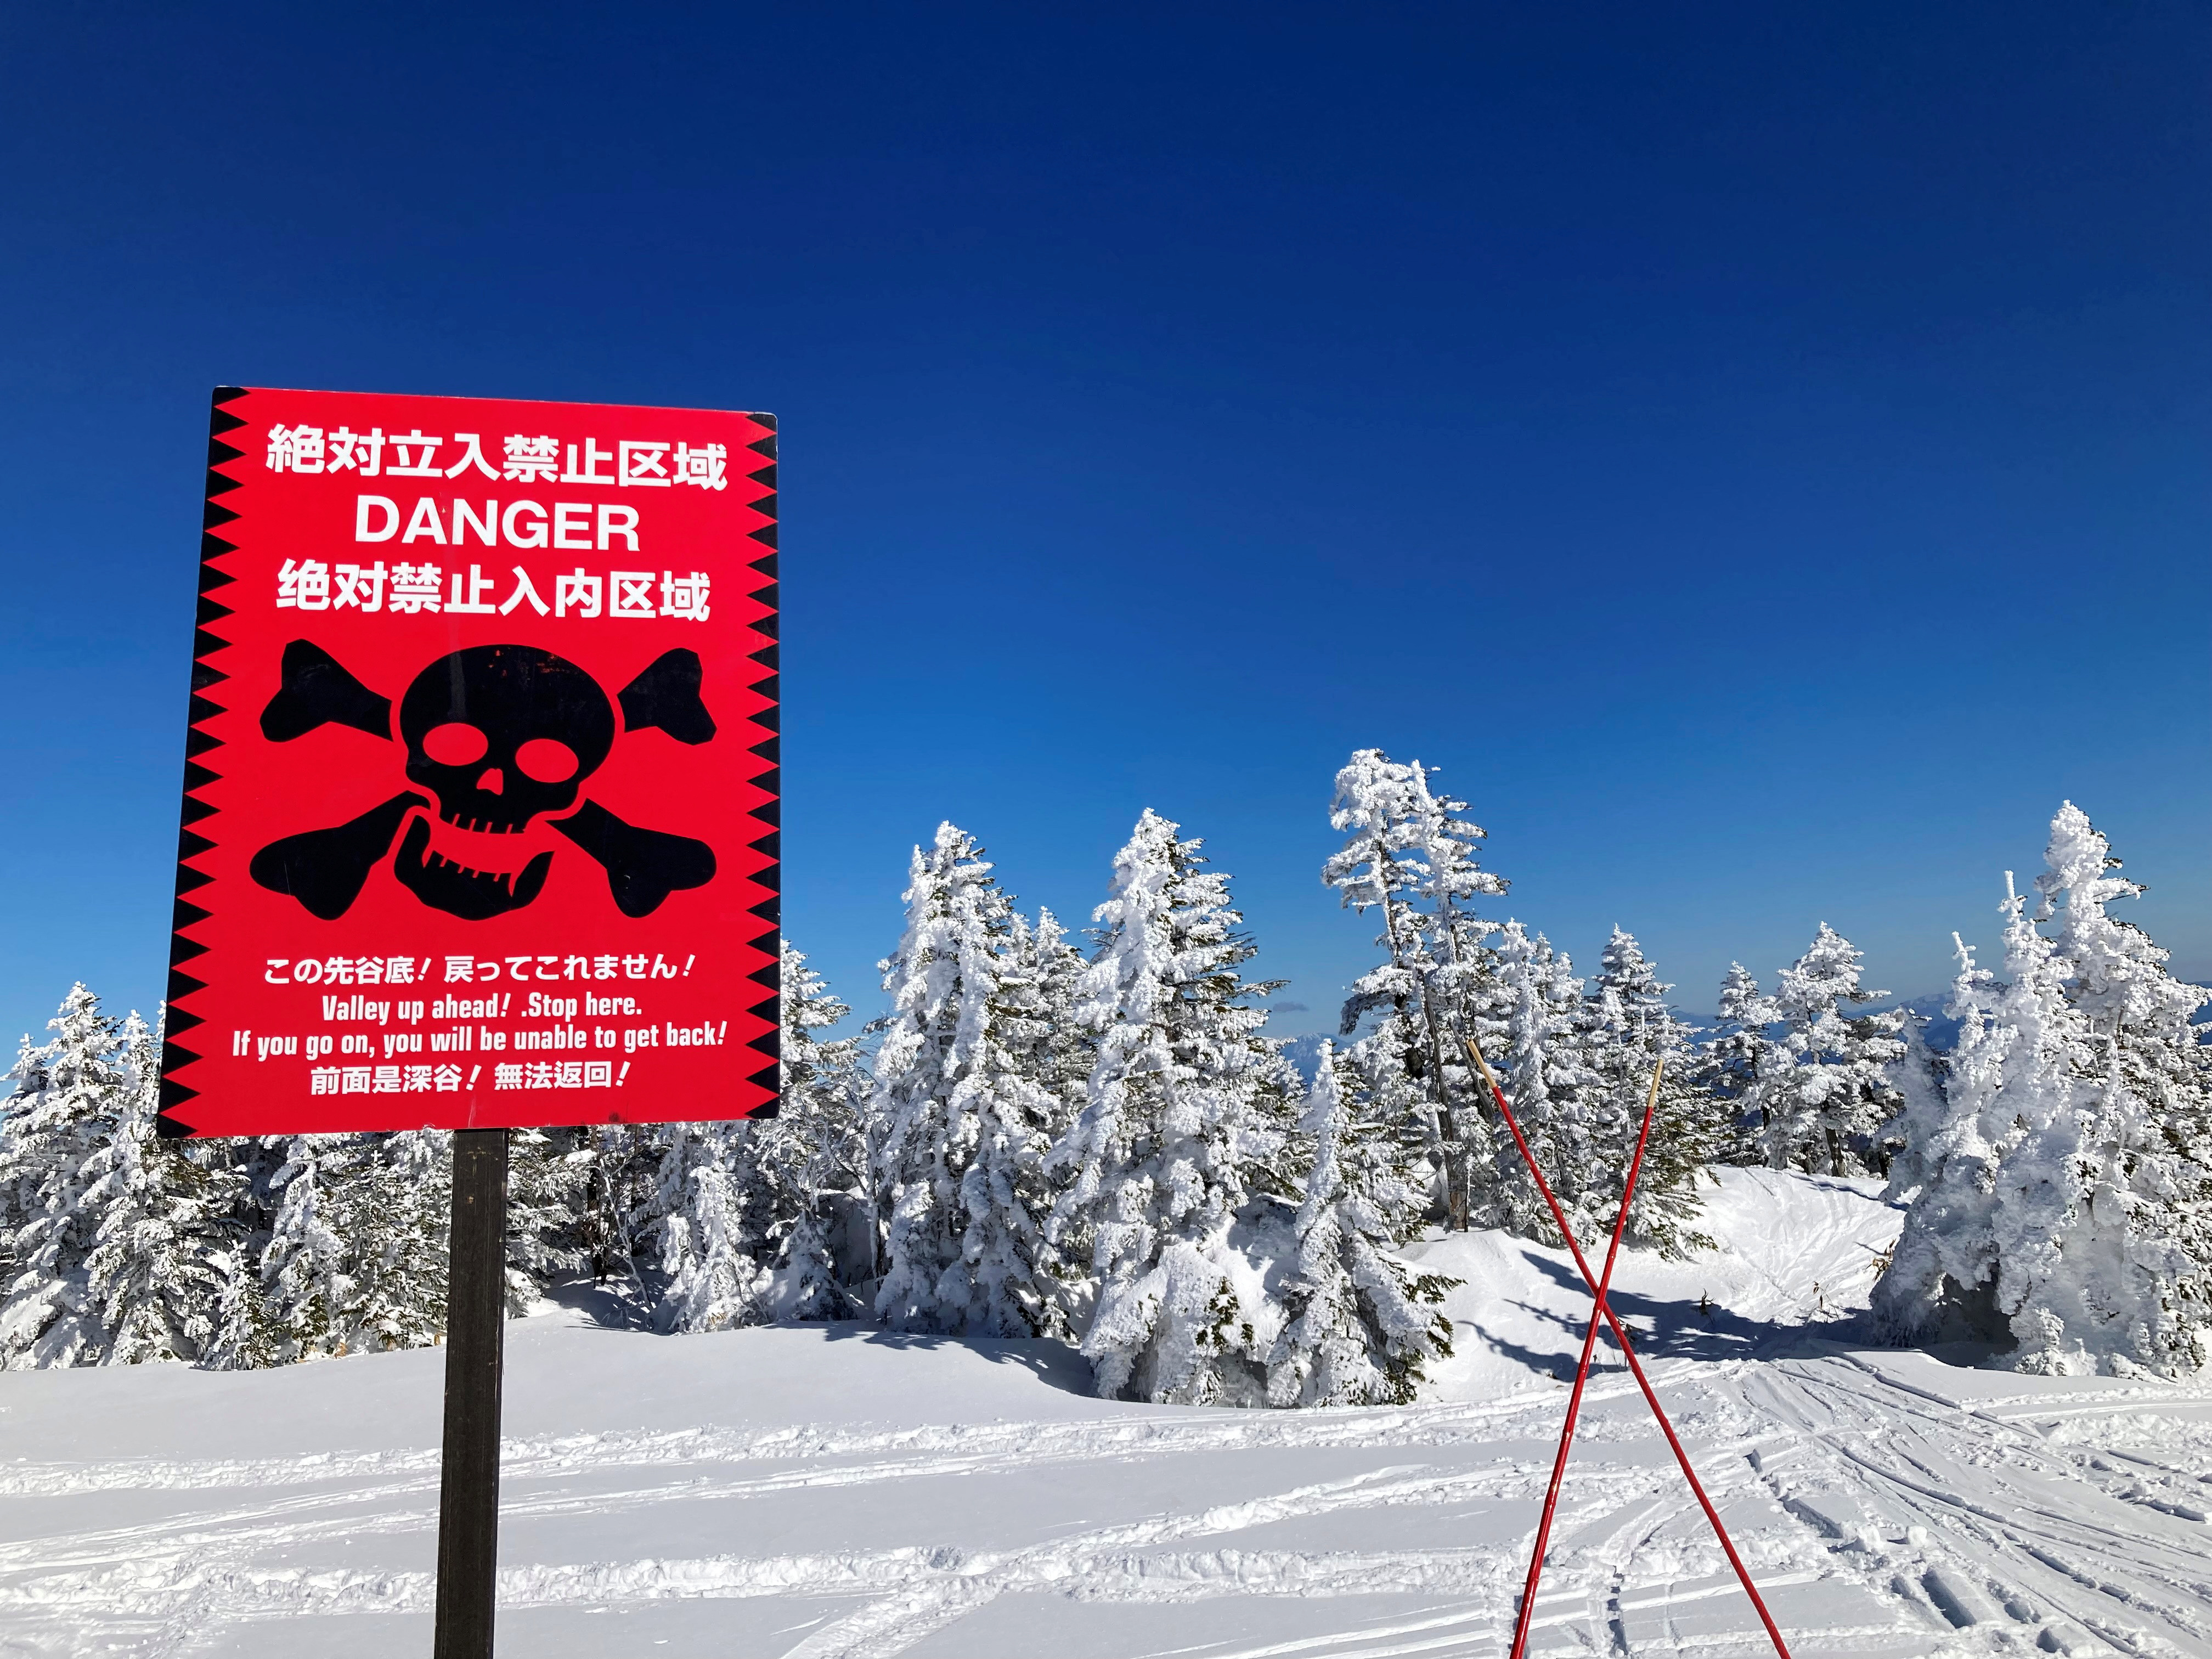 A sign prohibiting entry is pictured at a ski resort on Mt. Yokote in Shimotakai